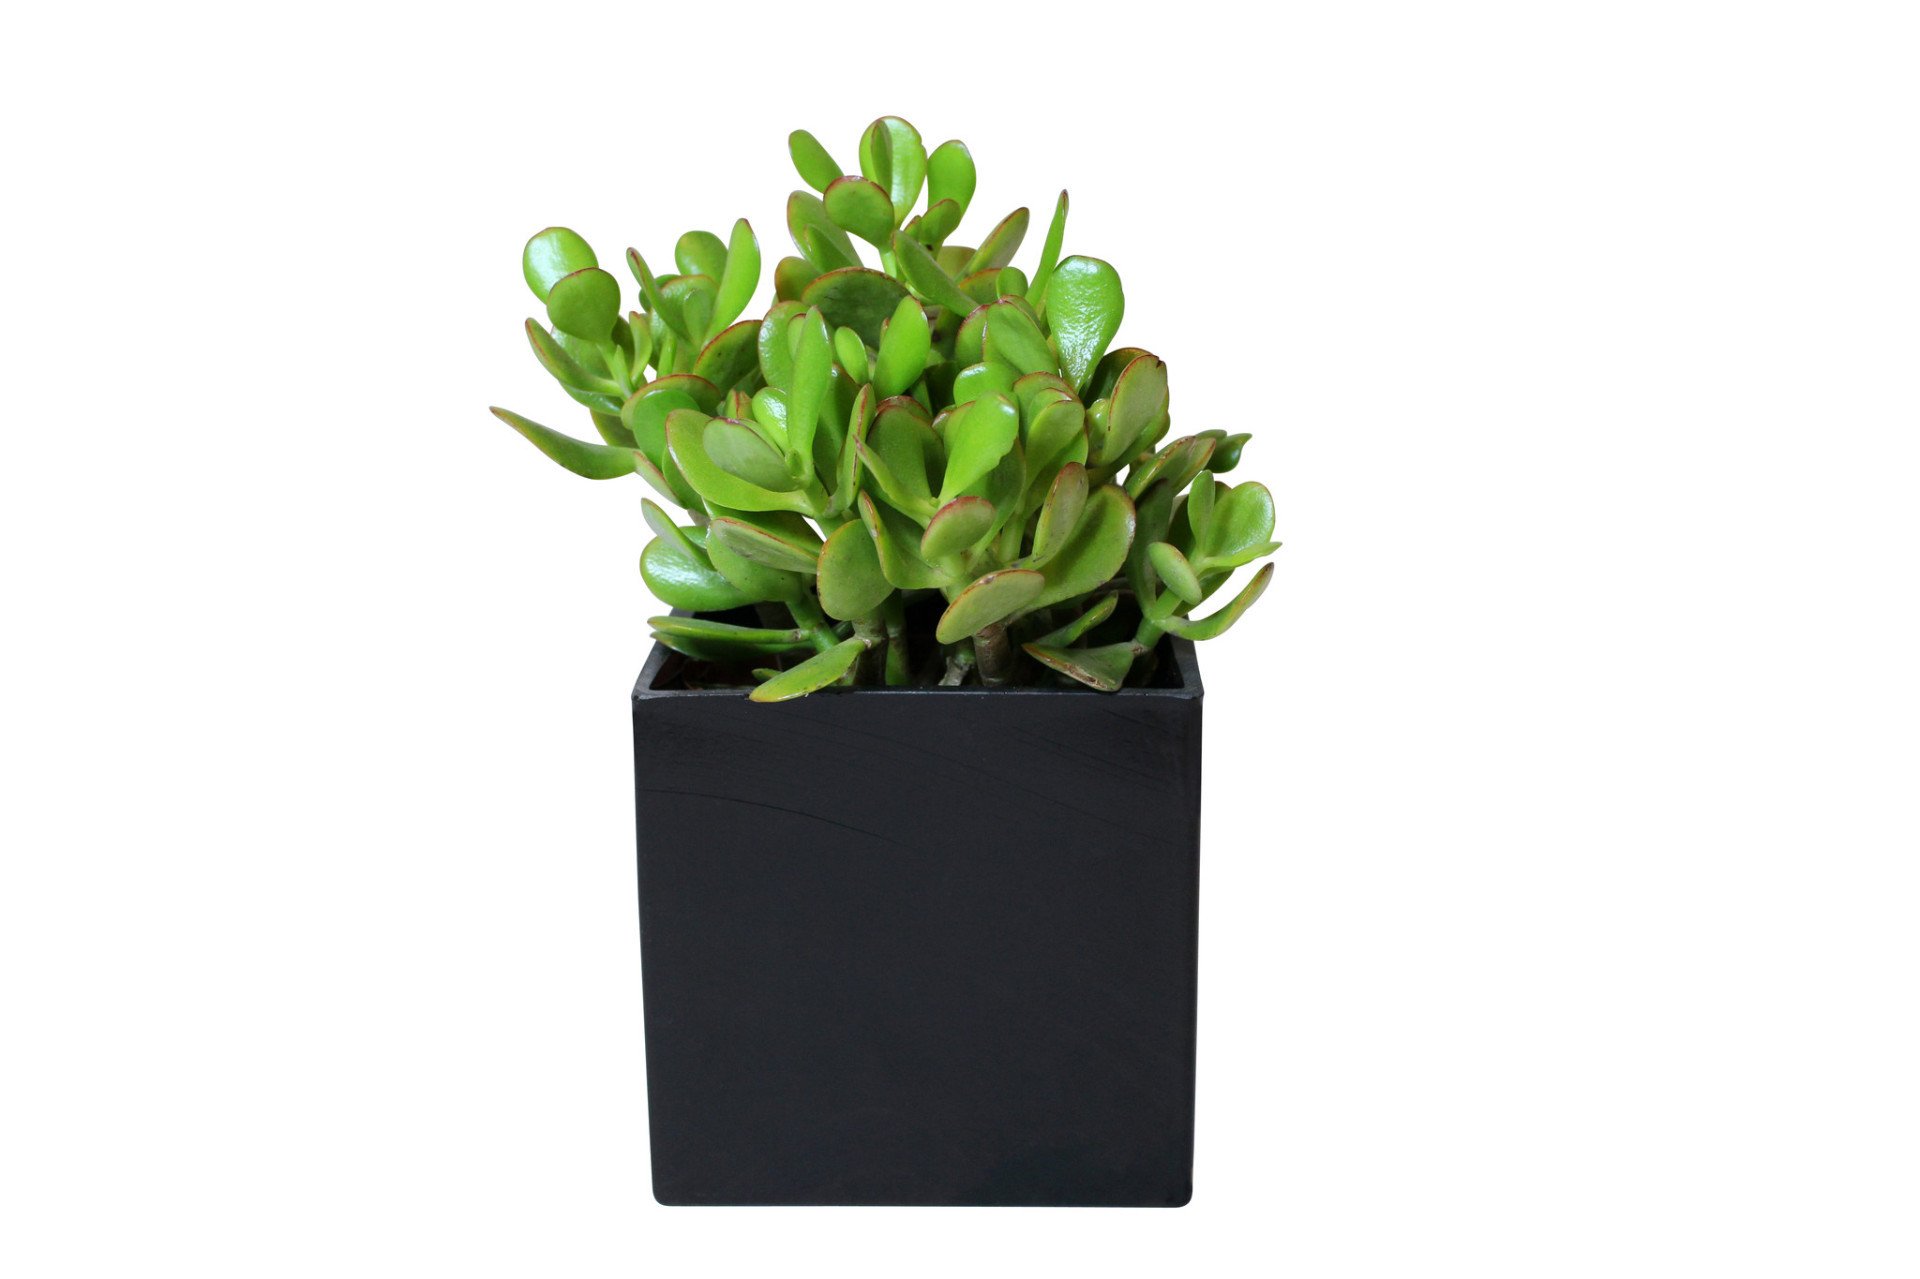 Jade Plants For Delivery - Anissa Rae Flowers | Midtown West NYC ...